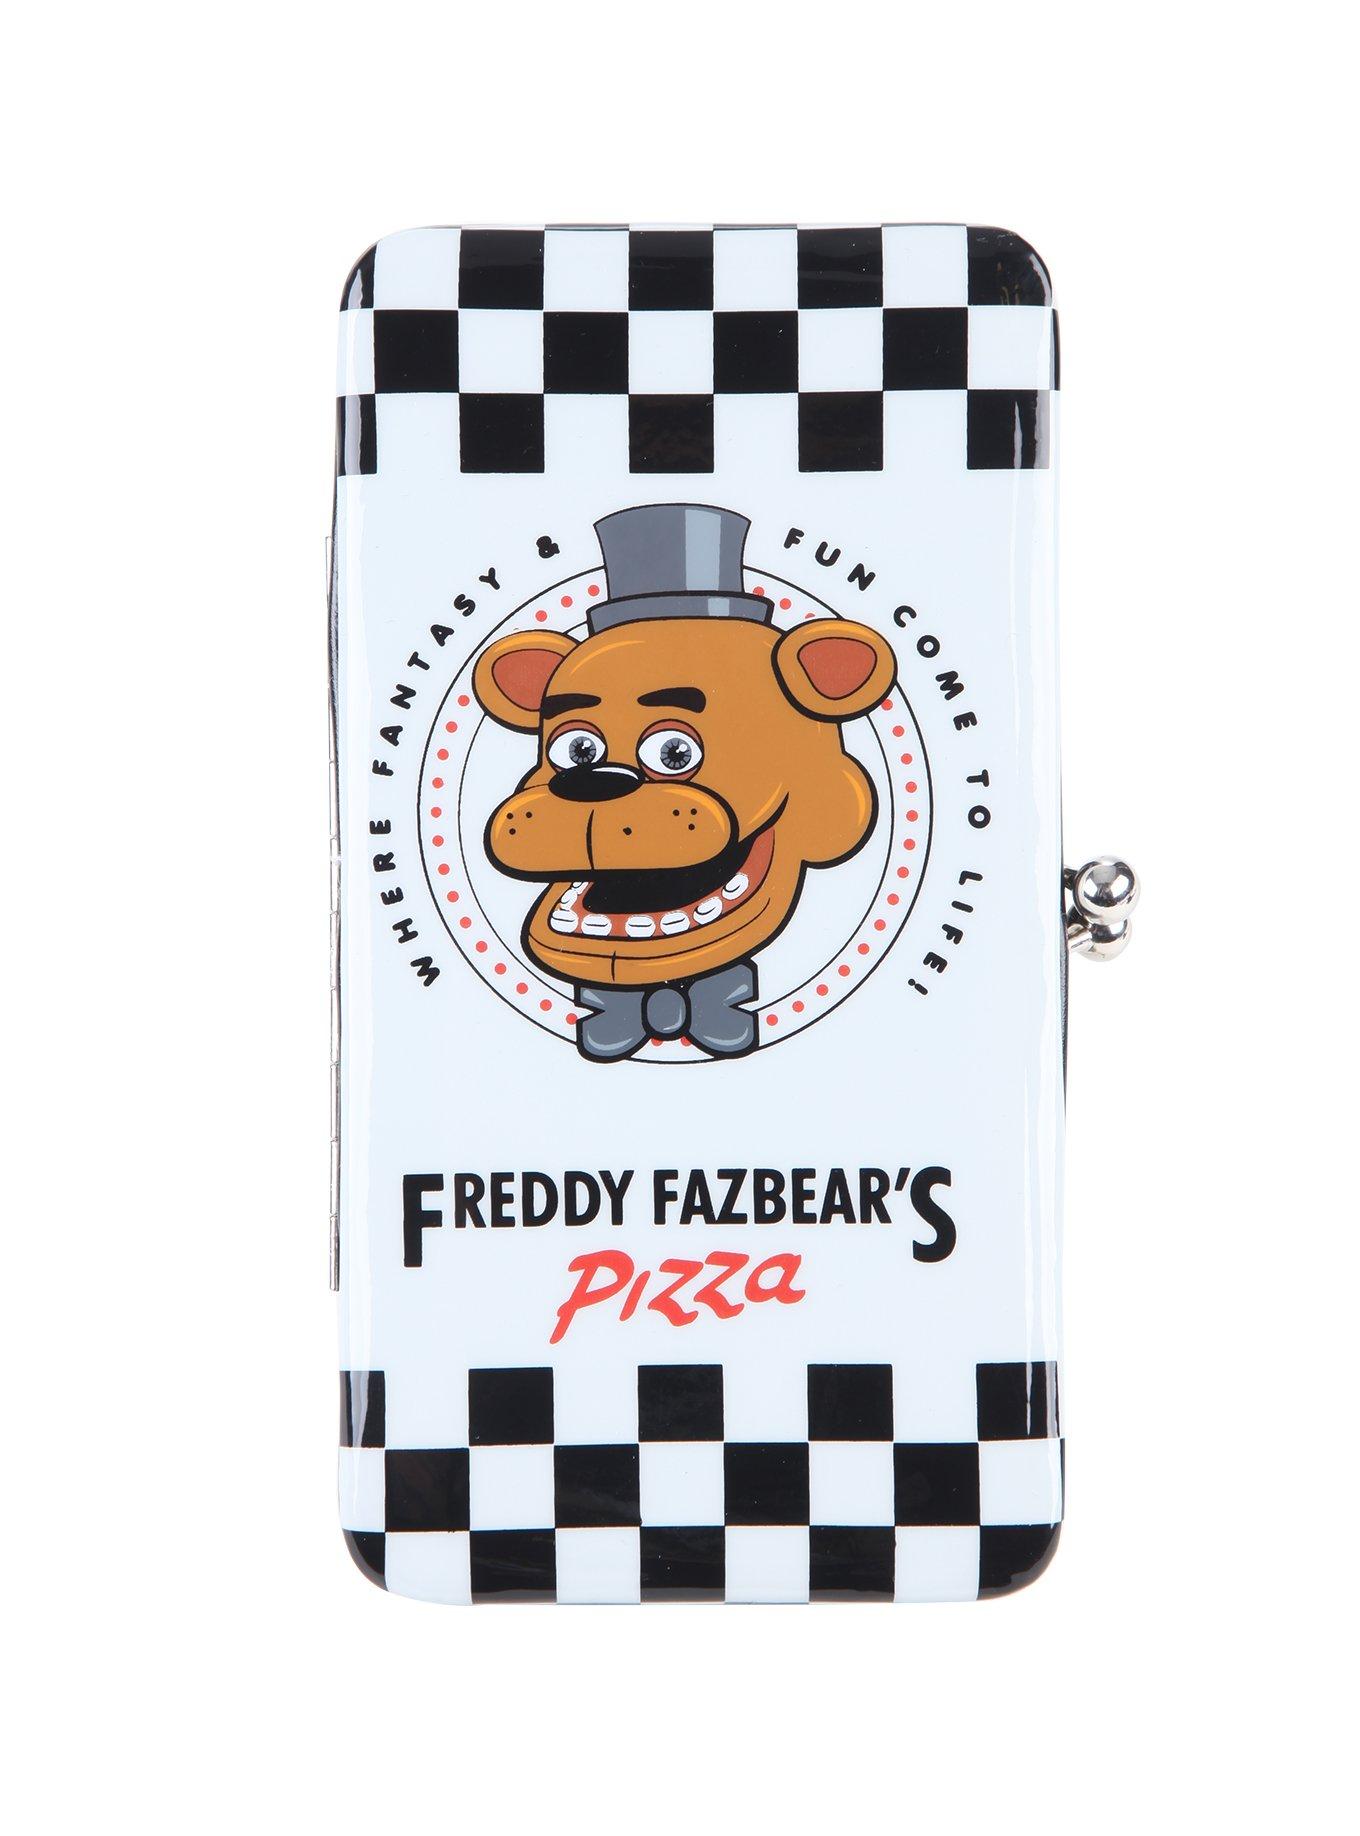 Hot Topic Five Nights At Freddy's Pizza Box Necklace